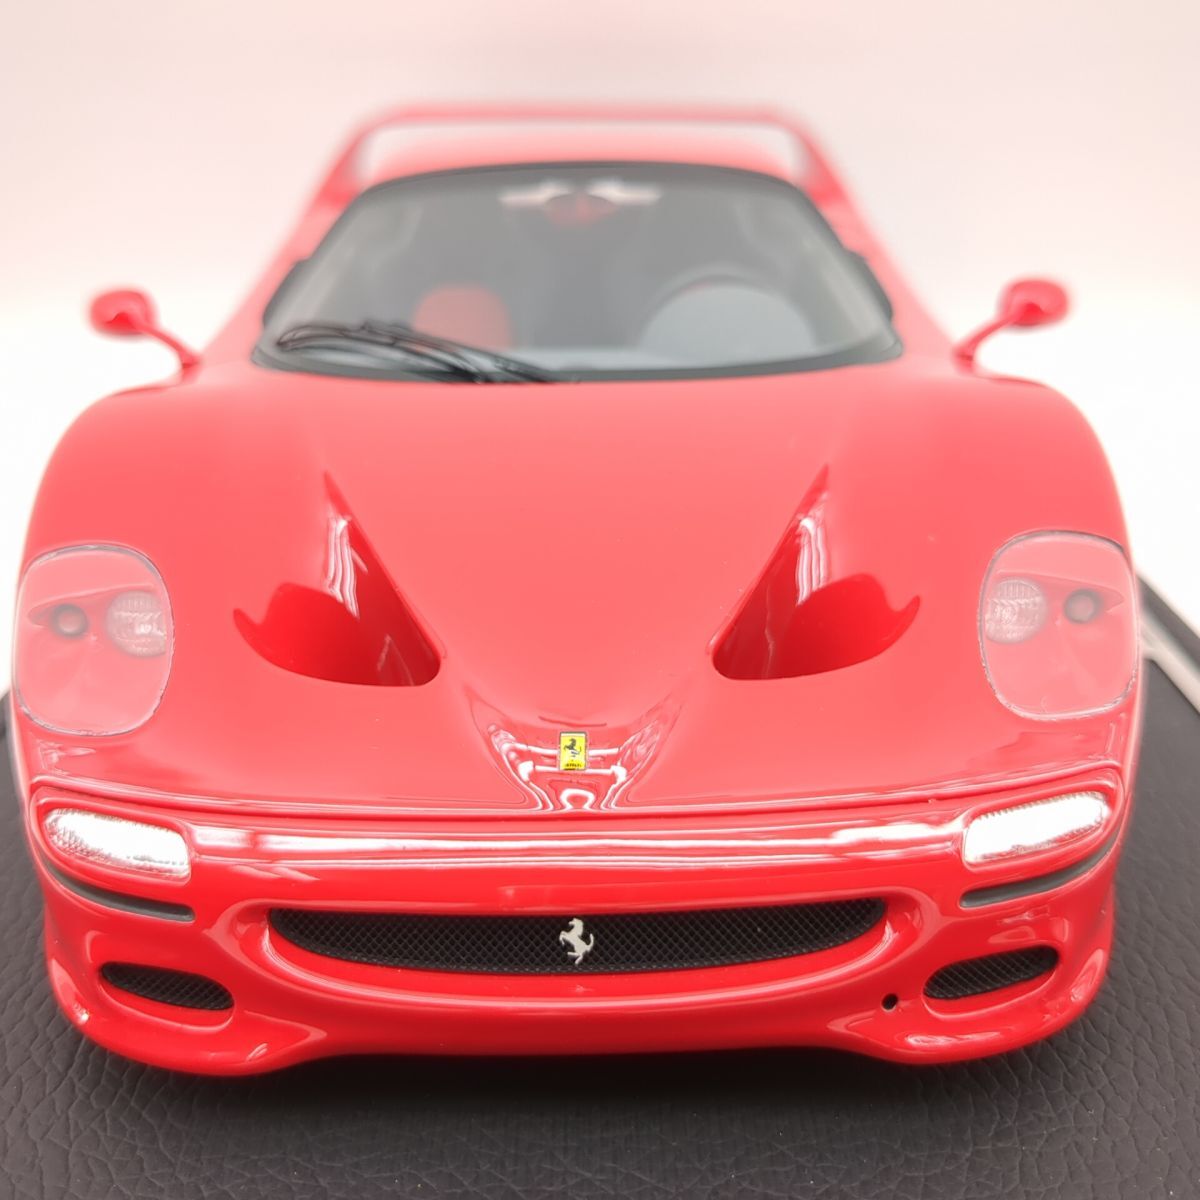 BBR MODELS　P18189A　フェラーリ　F50　Coupe　Rosso Corsa 322　レッド　1/18　ミニカー　700台限定　クリアケース付き　◆3109/宮竹店_画像3